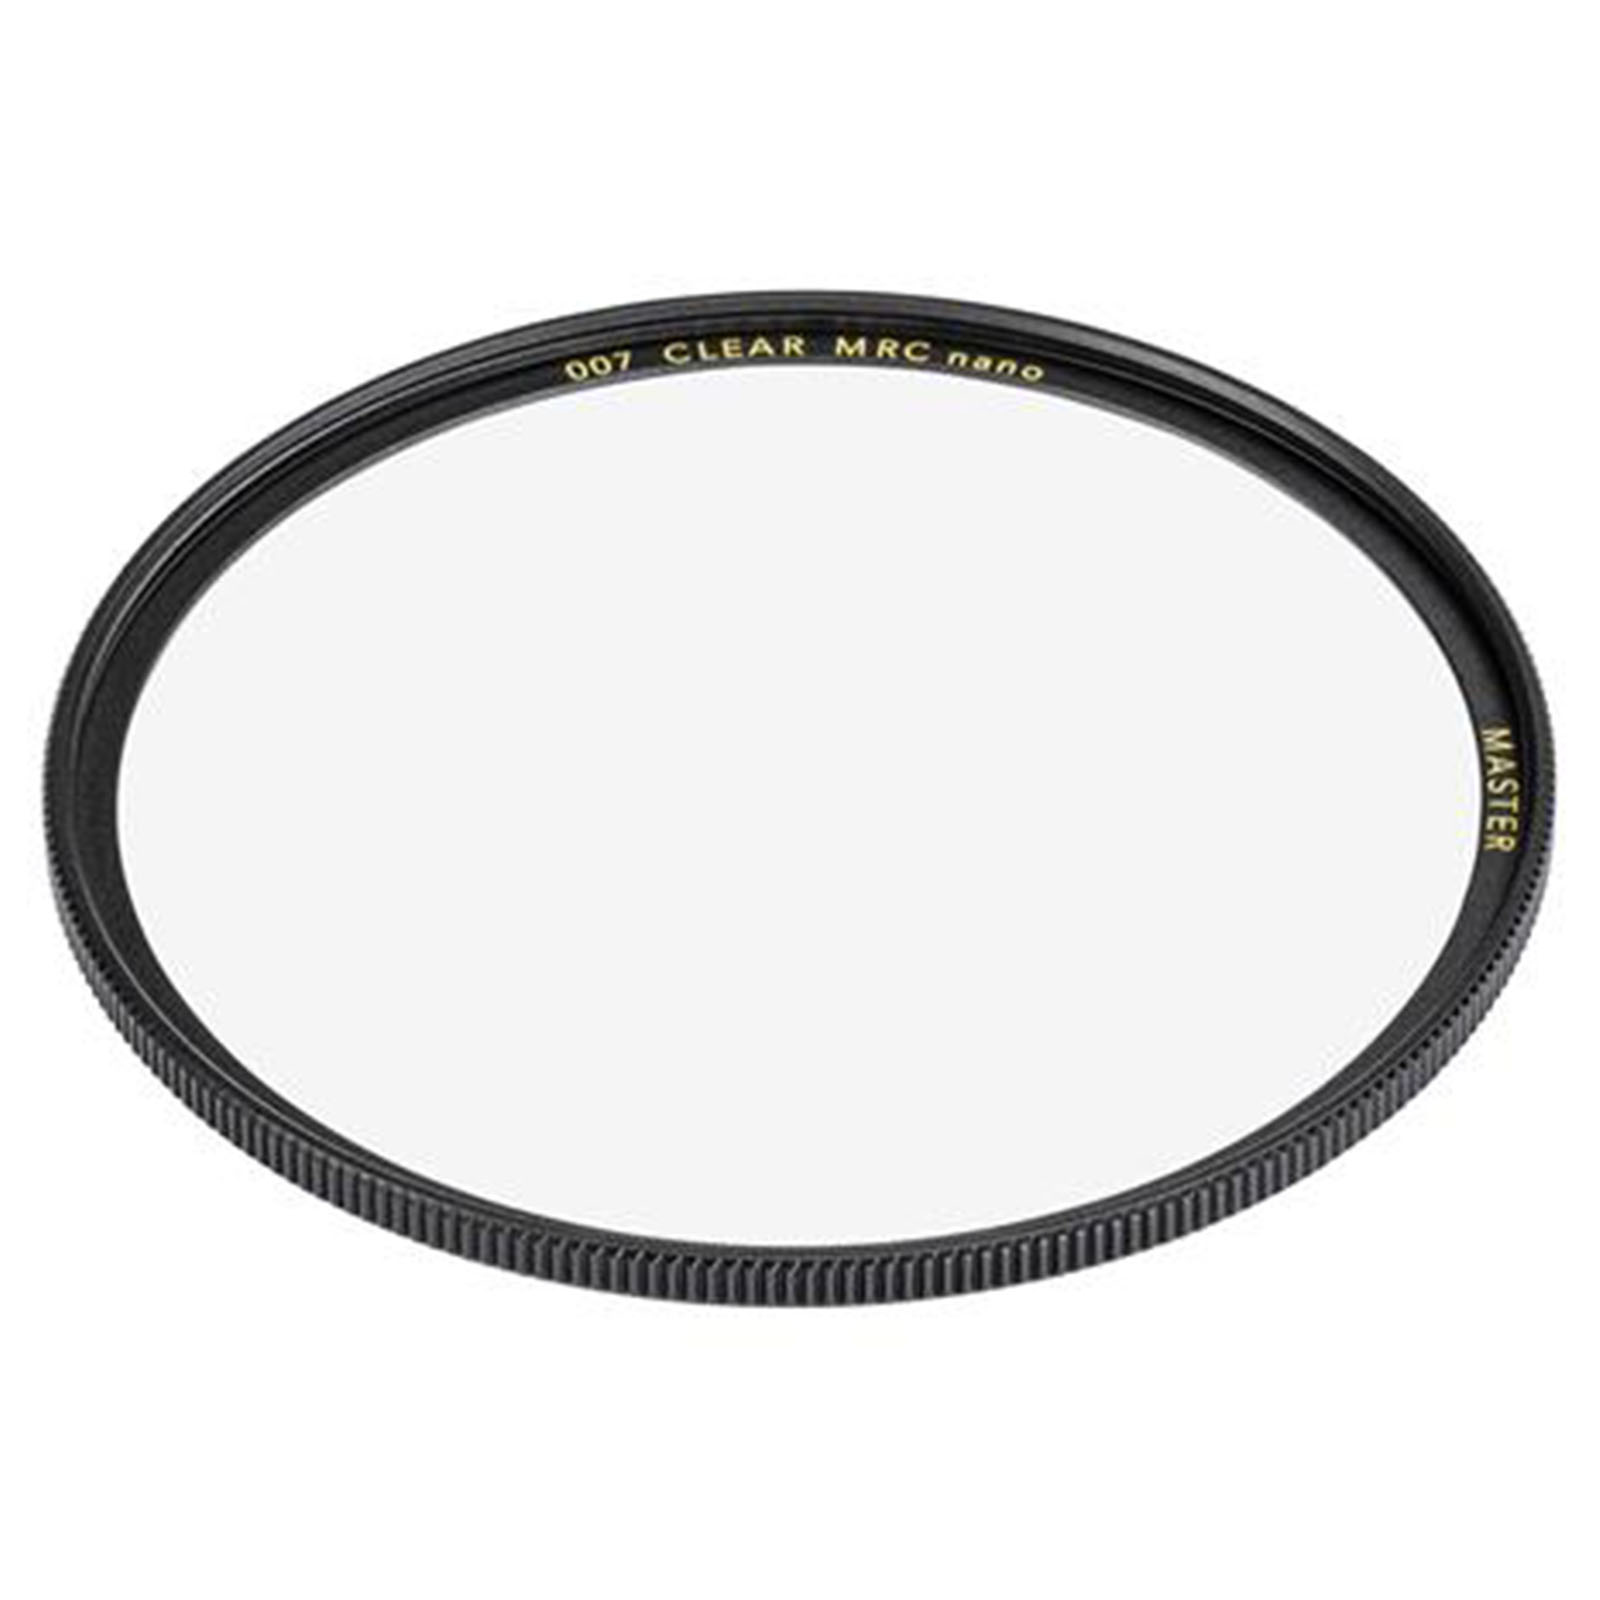 Image of BW 95mm Master Clear Filter MRC Nano Filter